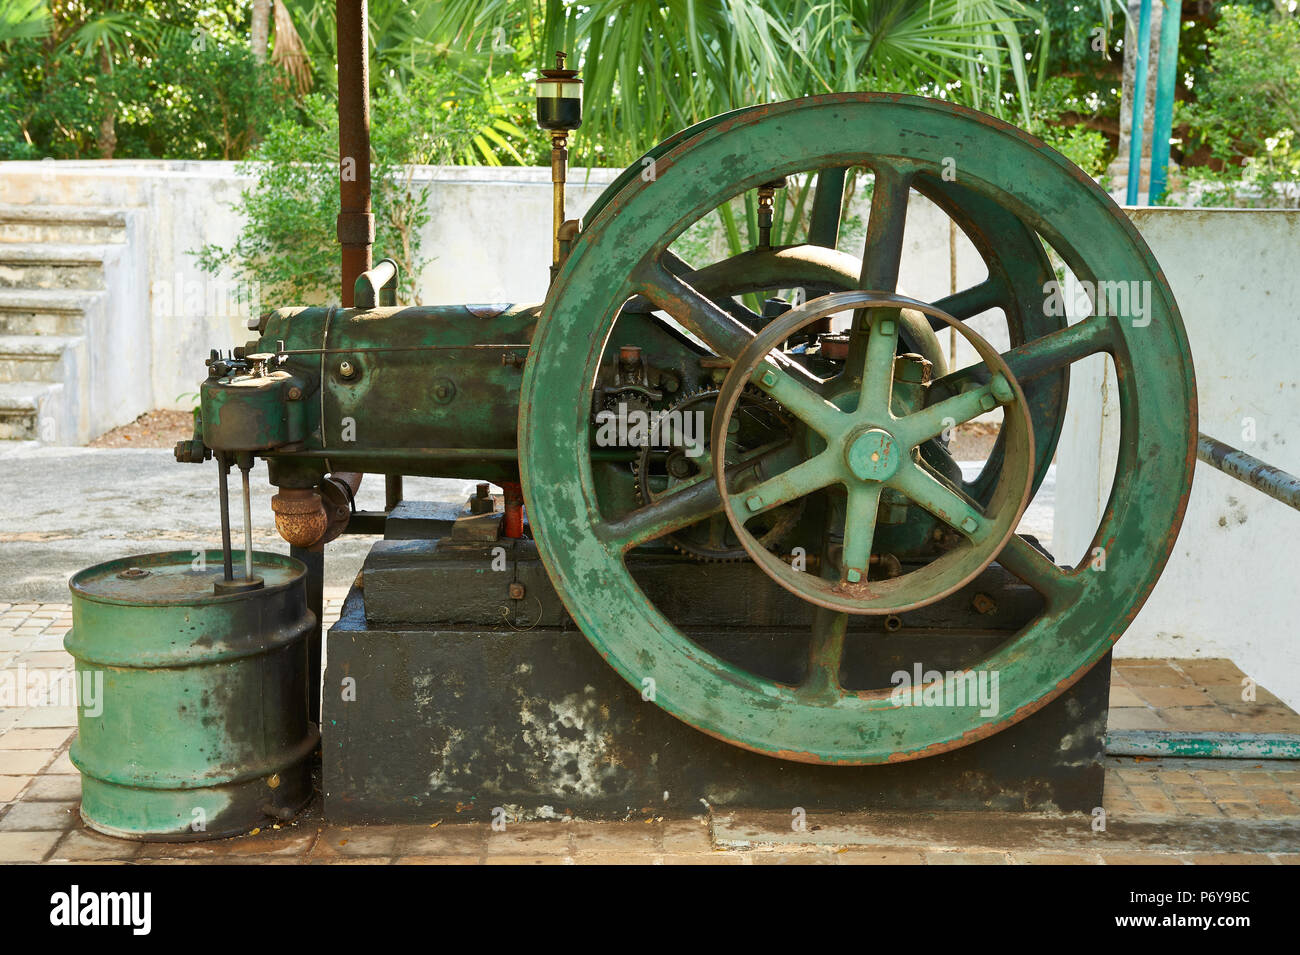 Pump at Hacienda Yaxcopoil, a 17th century henequen plantation near Merida, Yucatan, Mexico, now a museum, guest house and events venue. Stock Photo